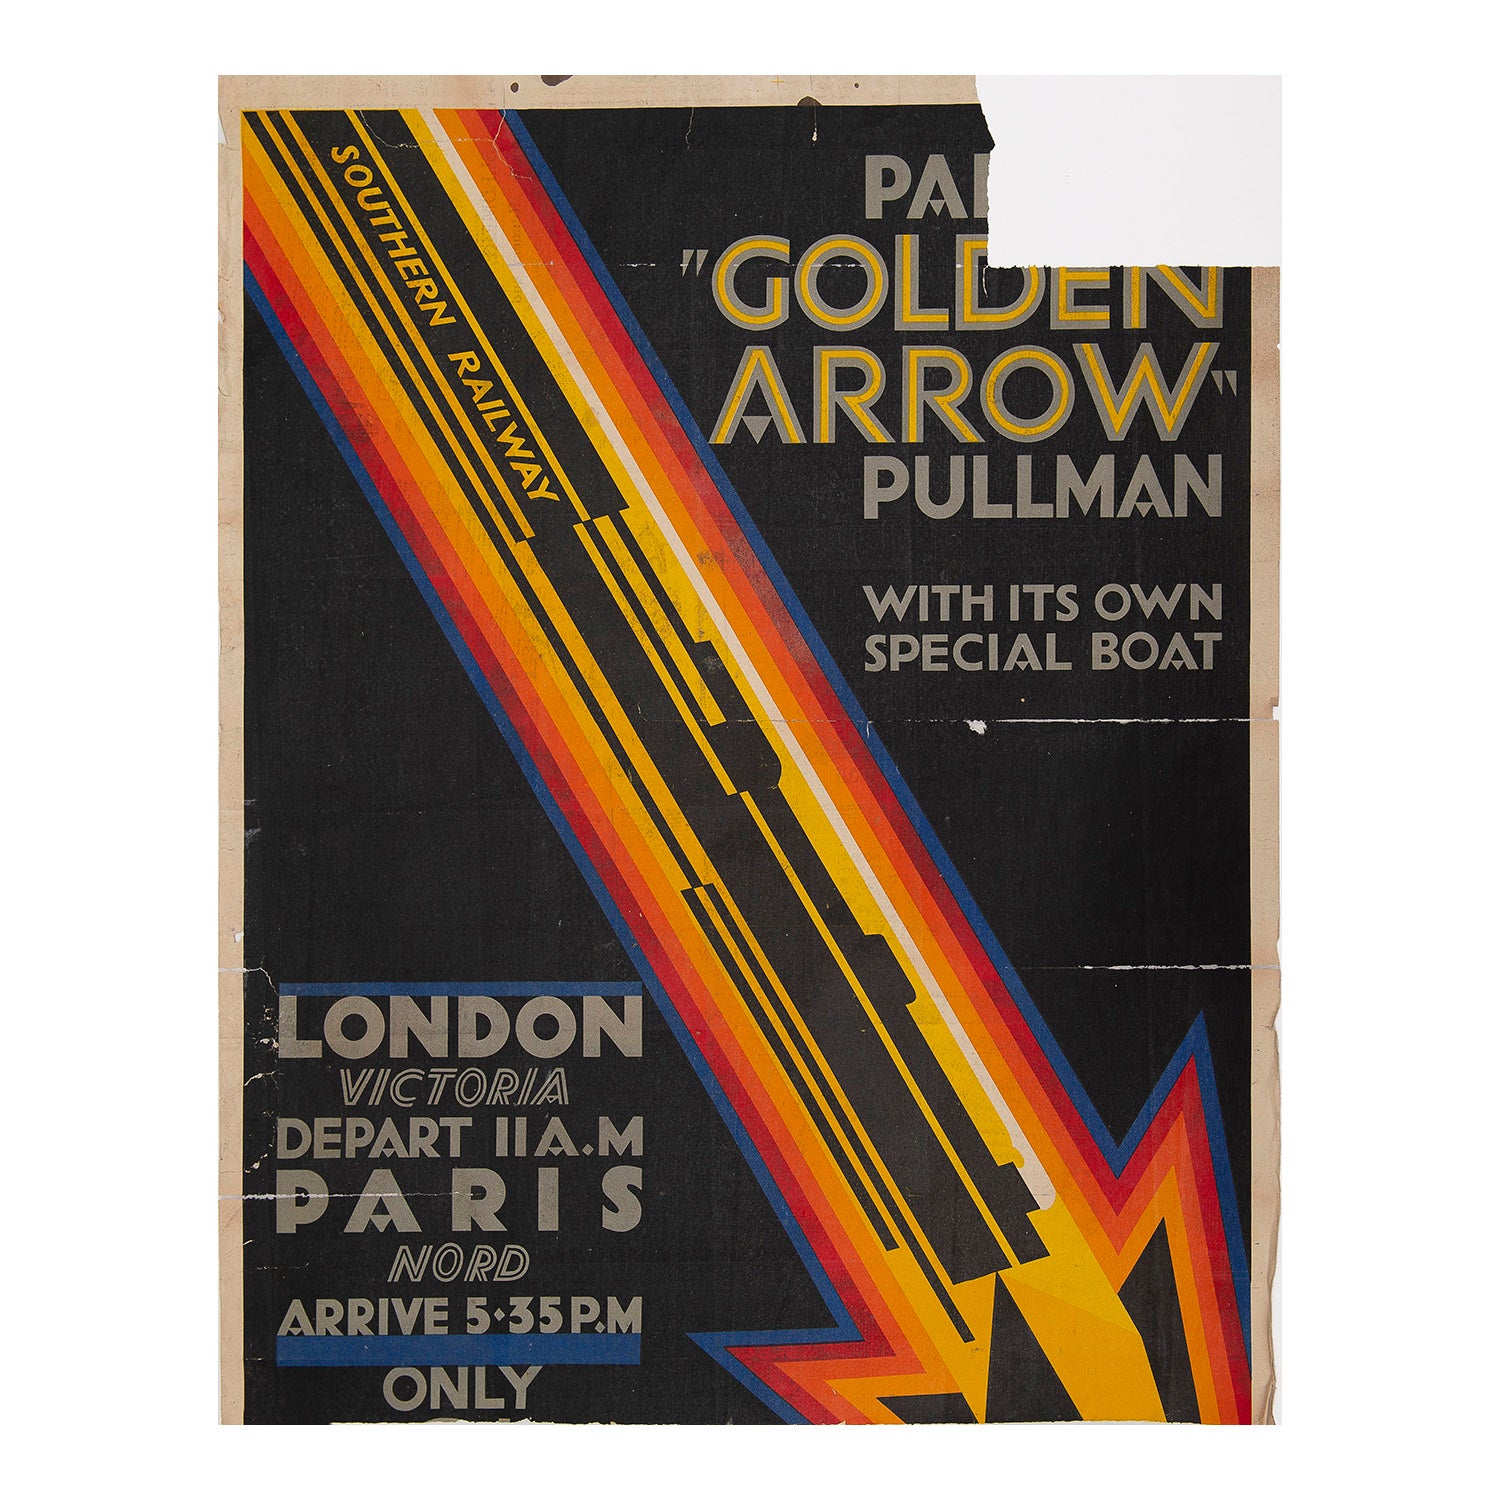 The remains of an original and rare Southern Railway poster designed by Charles Shepherd. (‘Shep’) and printed in 1929. The poster promotes the Southern Railway’s famous ‘Golden Arrow’ cross-channel Pullman service